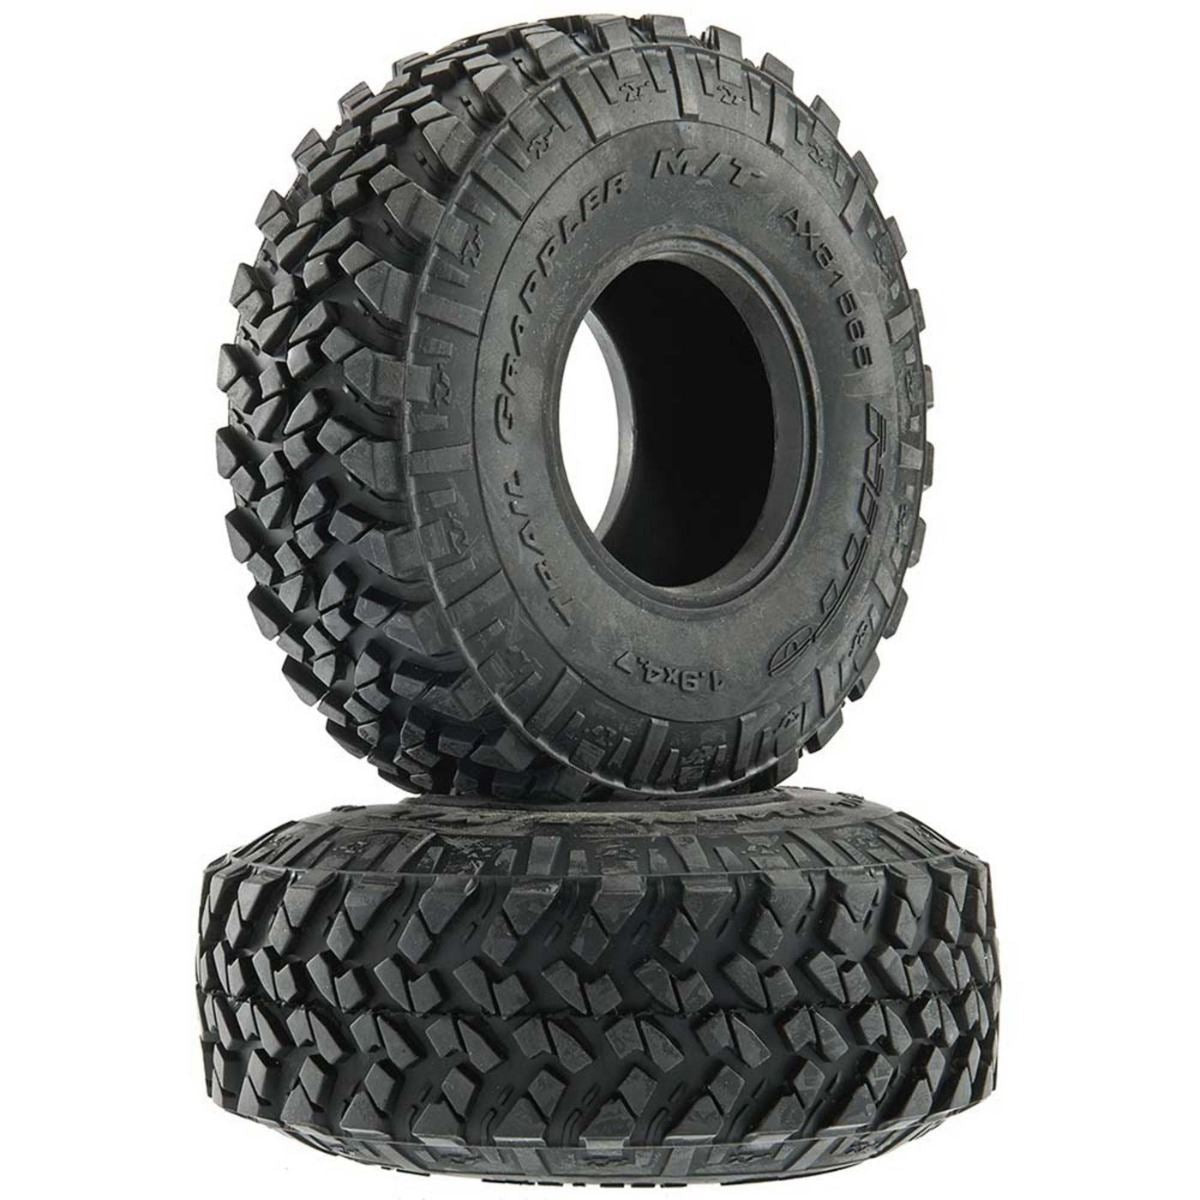 AXIAL 1.9 NittoTrailGrappler M/T R35 Compnd (2)